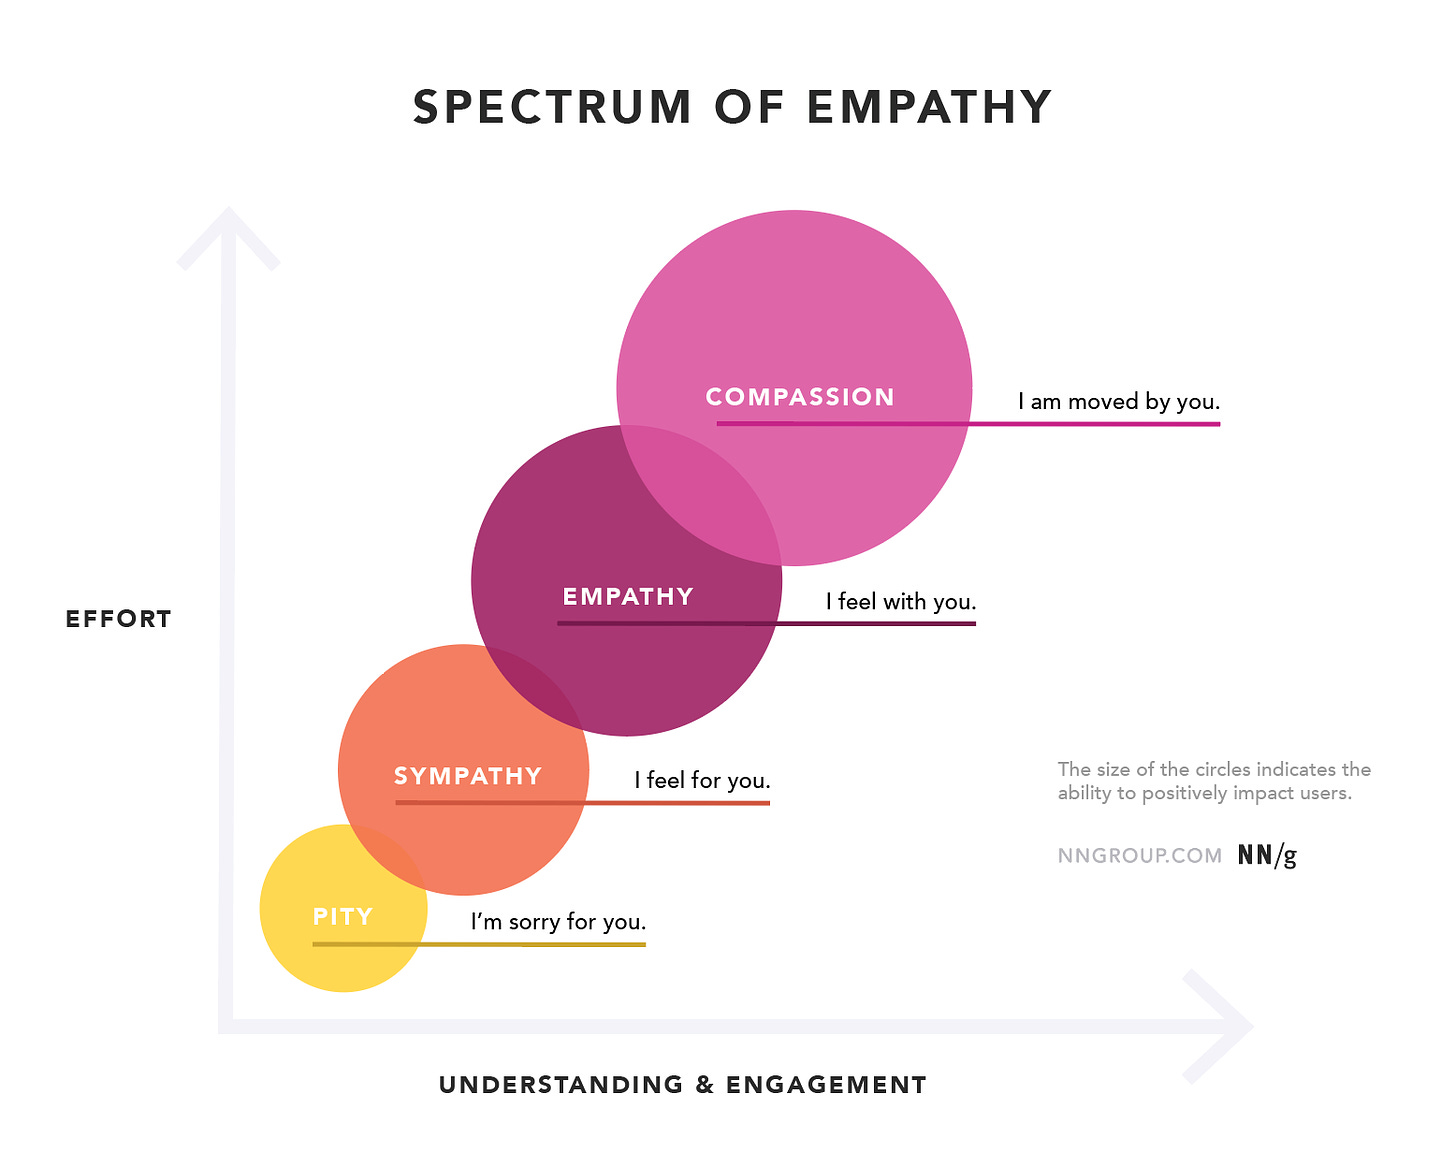 The Spectrum of Empathy by Sarah Gibbons